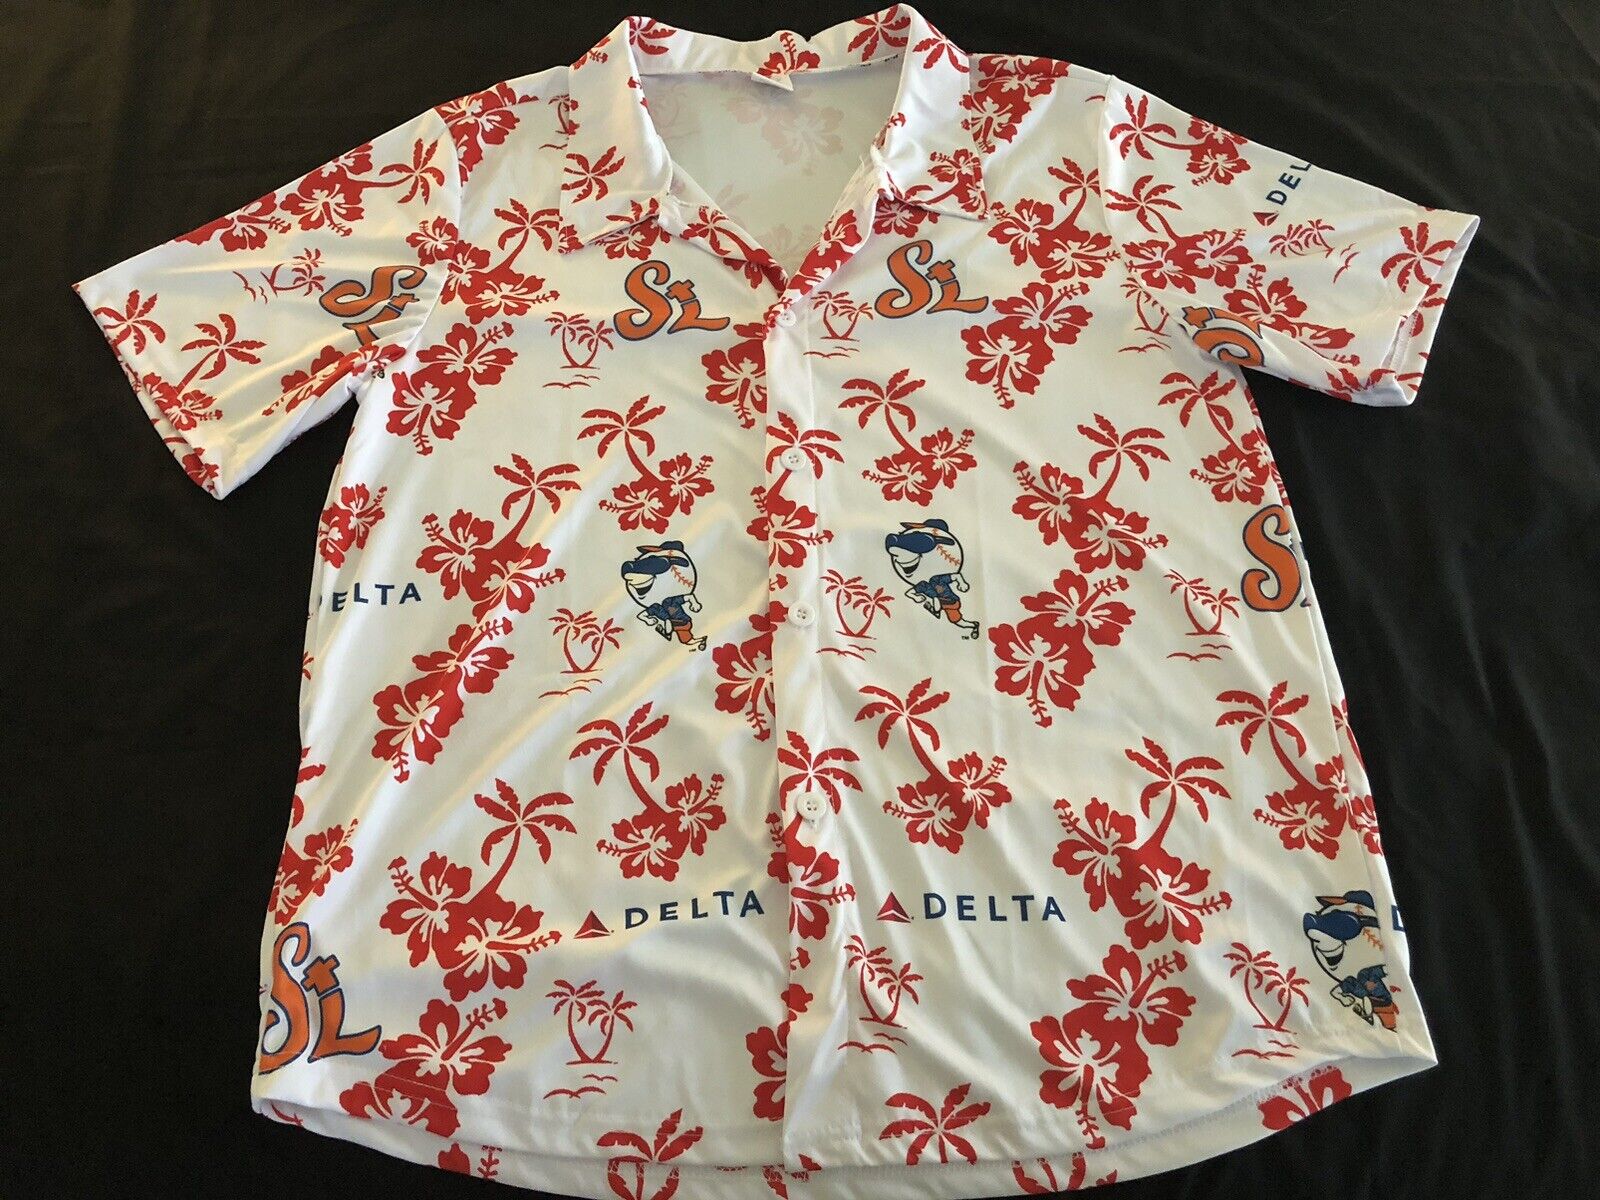 VTG. ST.LUCIE METS DELTA AIRLINES TROPICAL SHIRT WHITE RED SIZE L